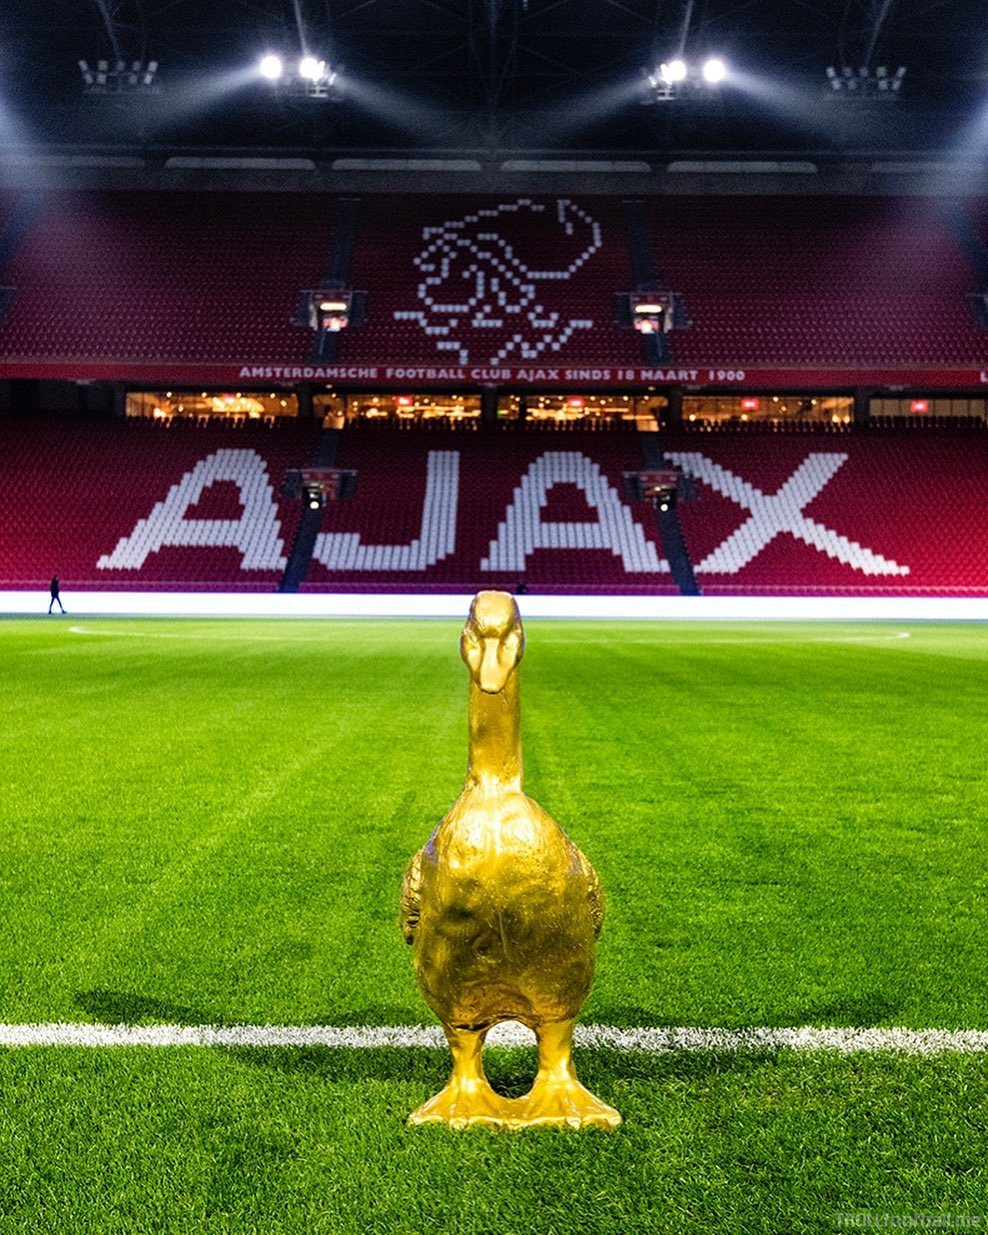 Ajax posted a picture of a golden goose (or duck) on their Instagram account. In the comments fans are saying this tease is linked to Pato since his nickname is 'The duck'.